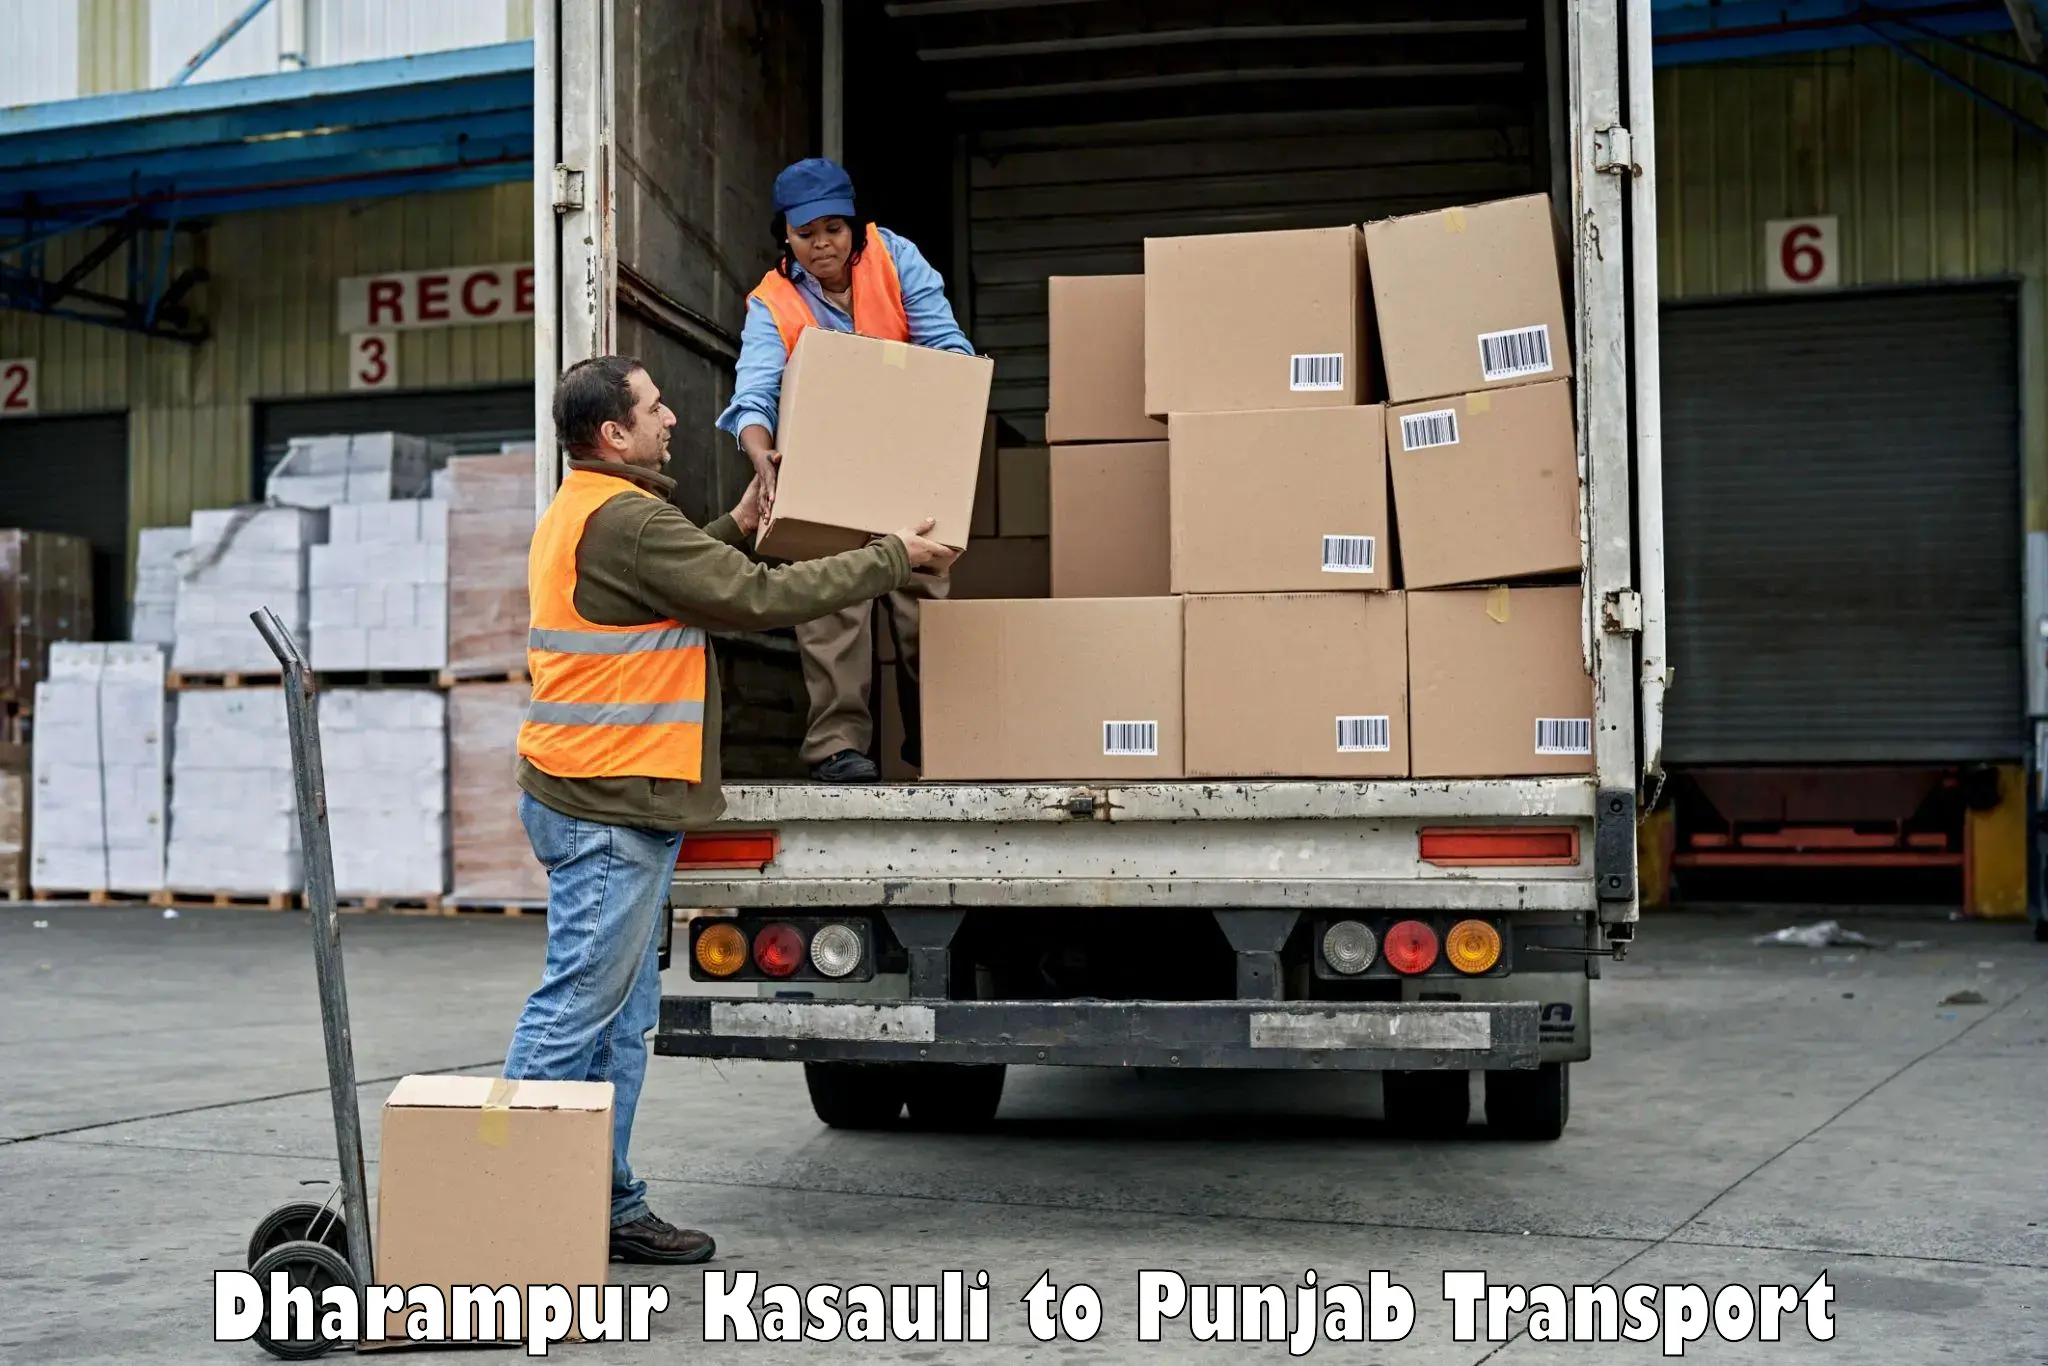 Domestic transport services Dharampur Kasauli to Patiala